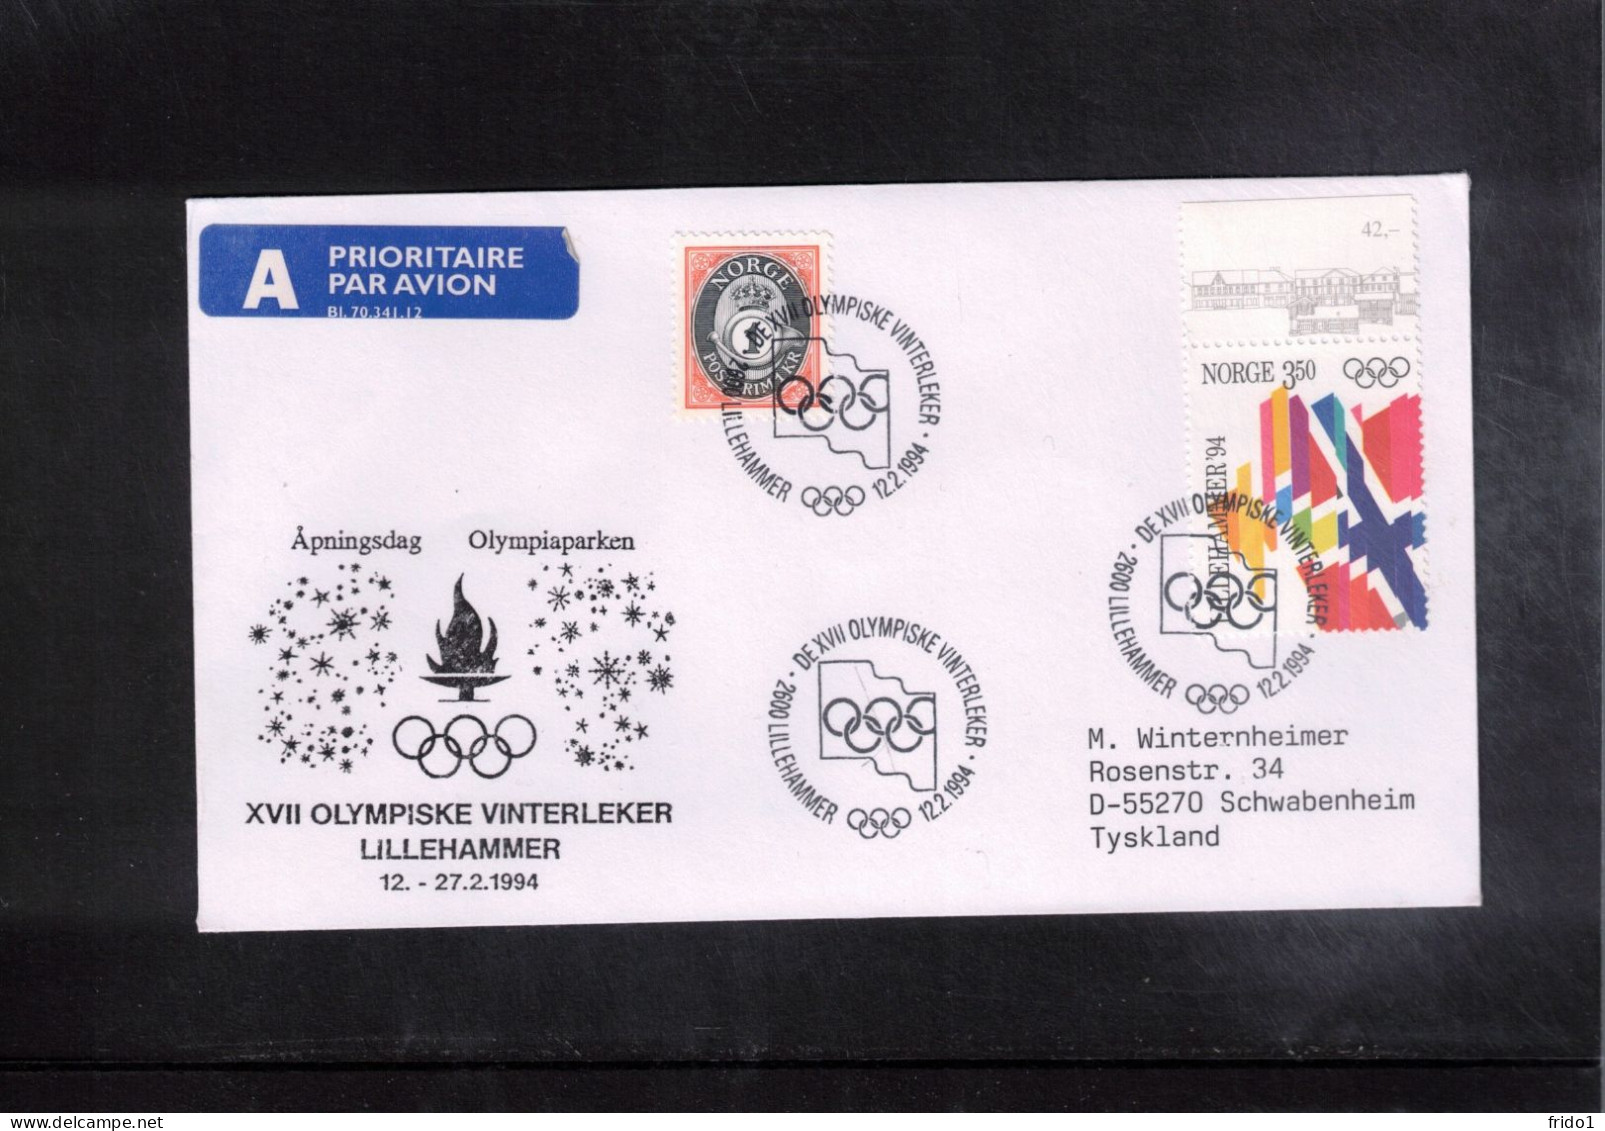 Norway 1994 Olympic Games Lillehammer - Olympia Park Interesting Postcard - Winter 1994: Lillehammer